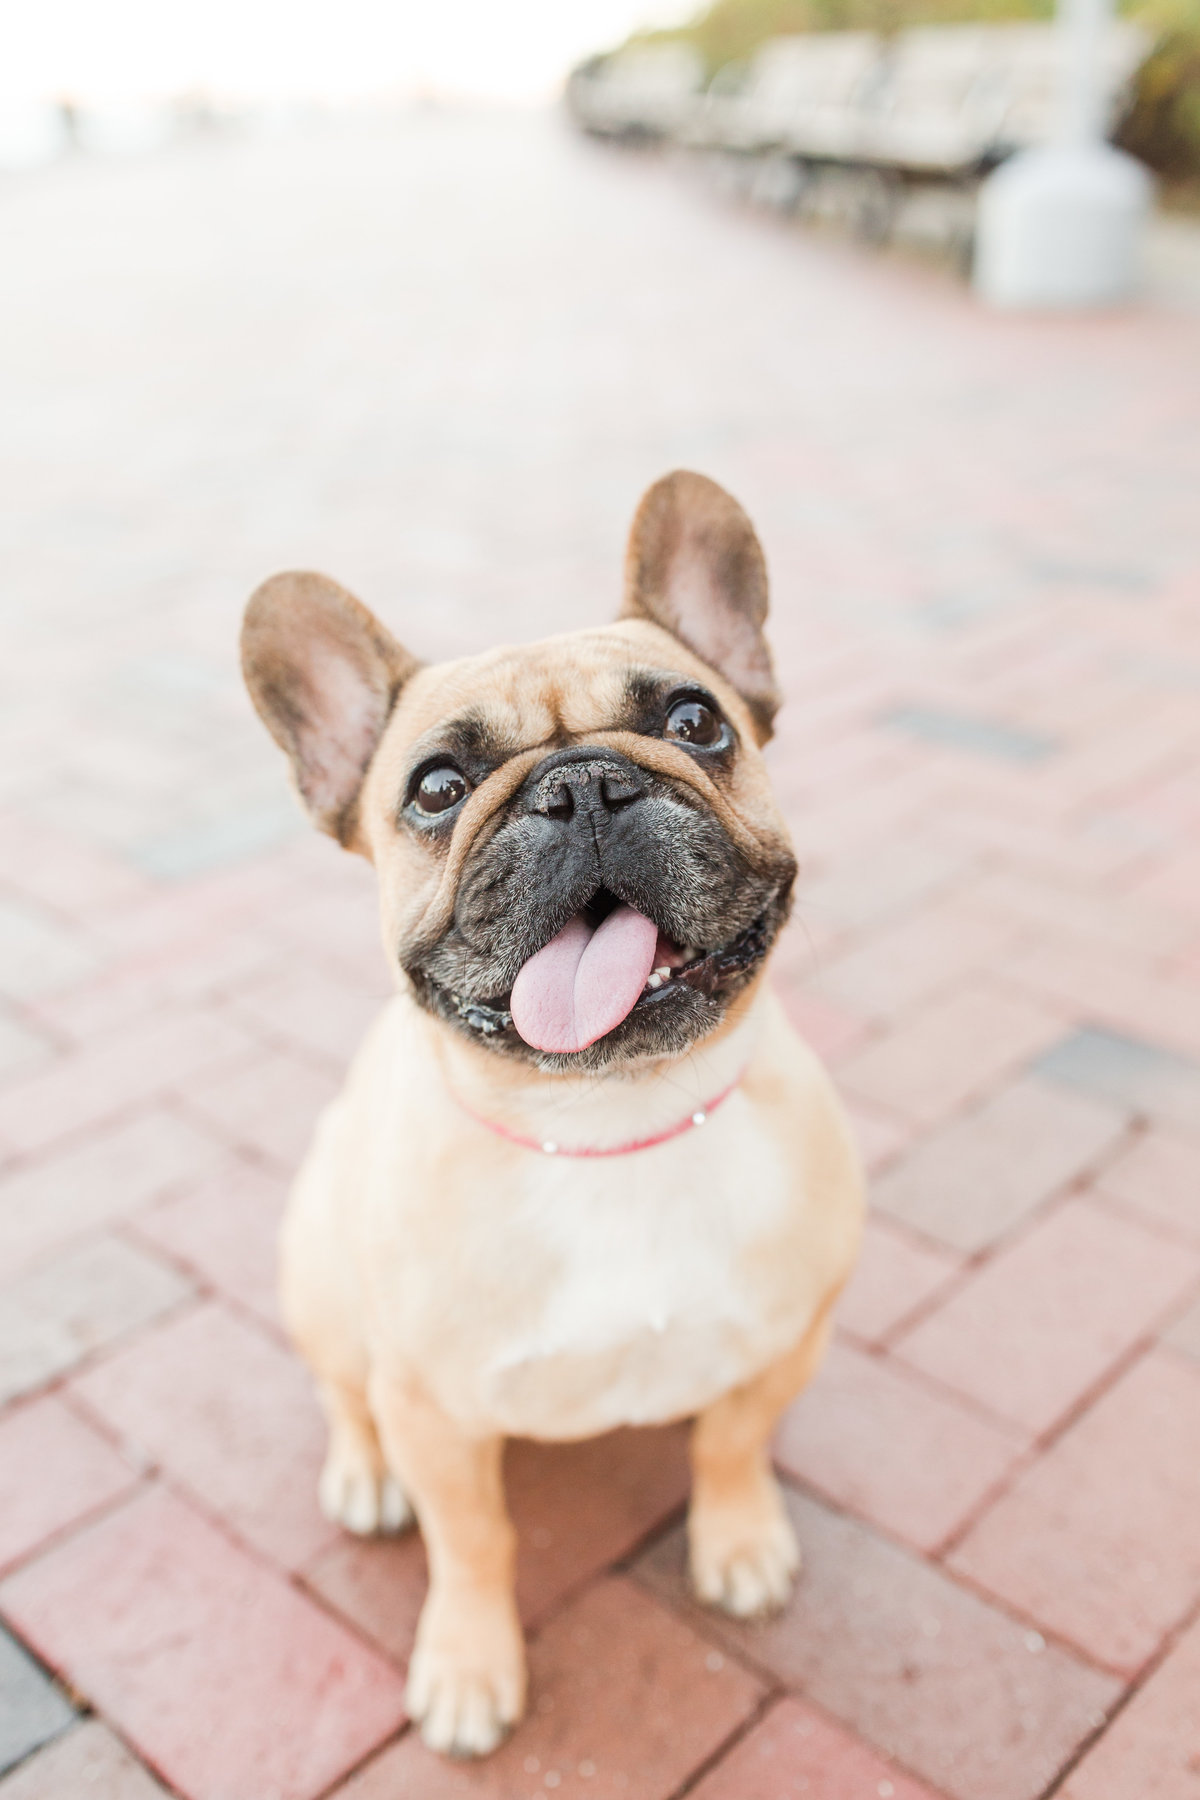 French Bulldog with tongue sticking out